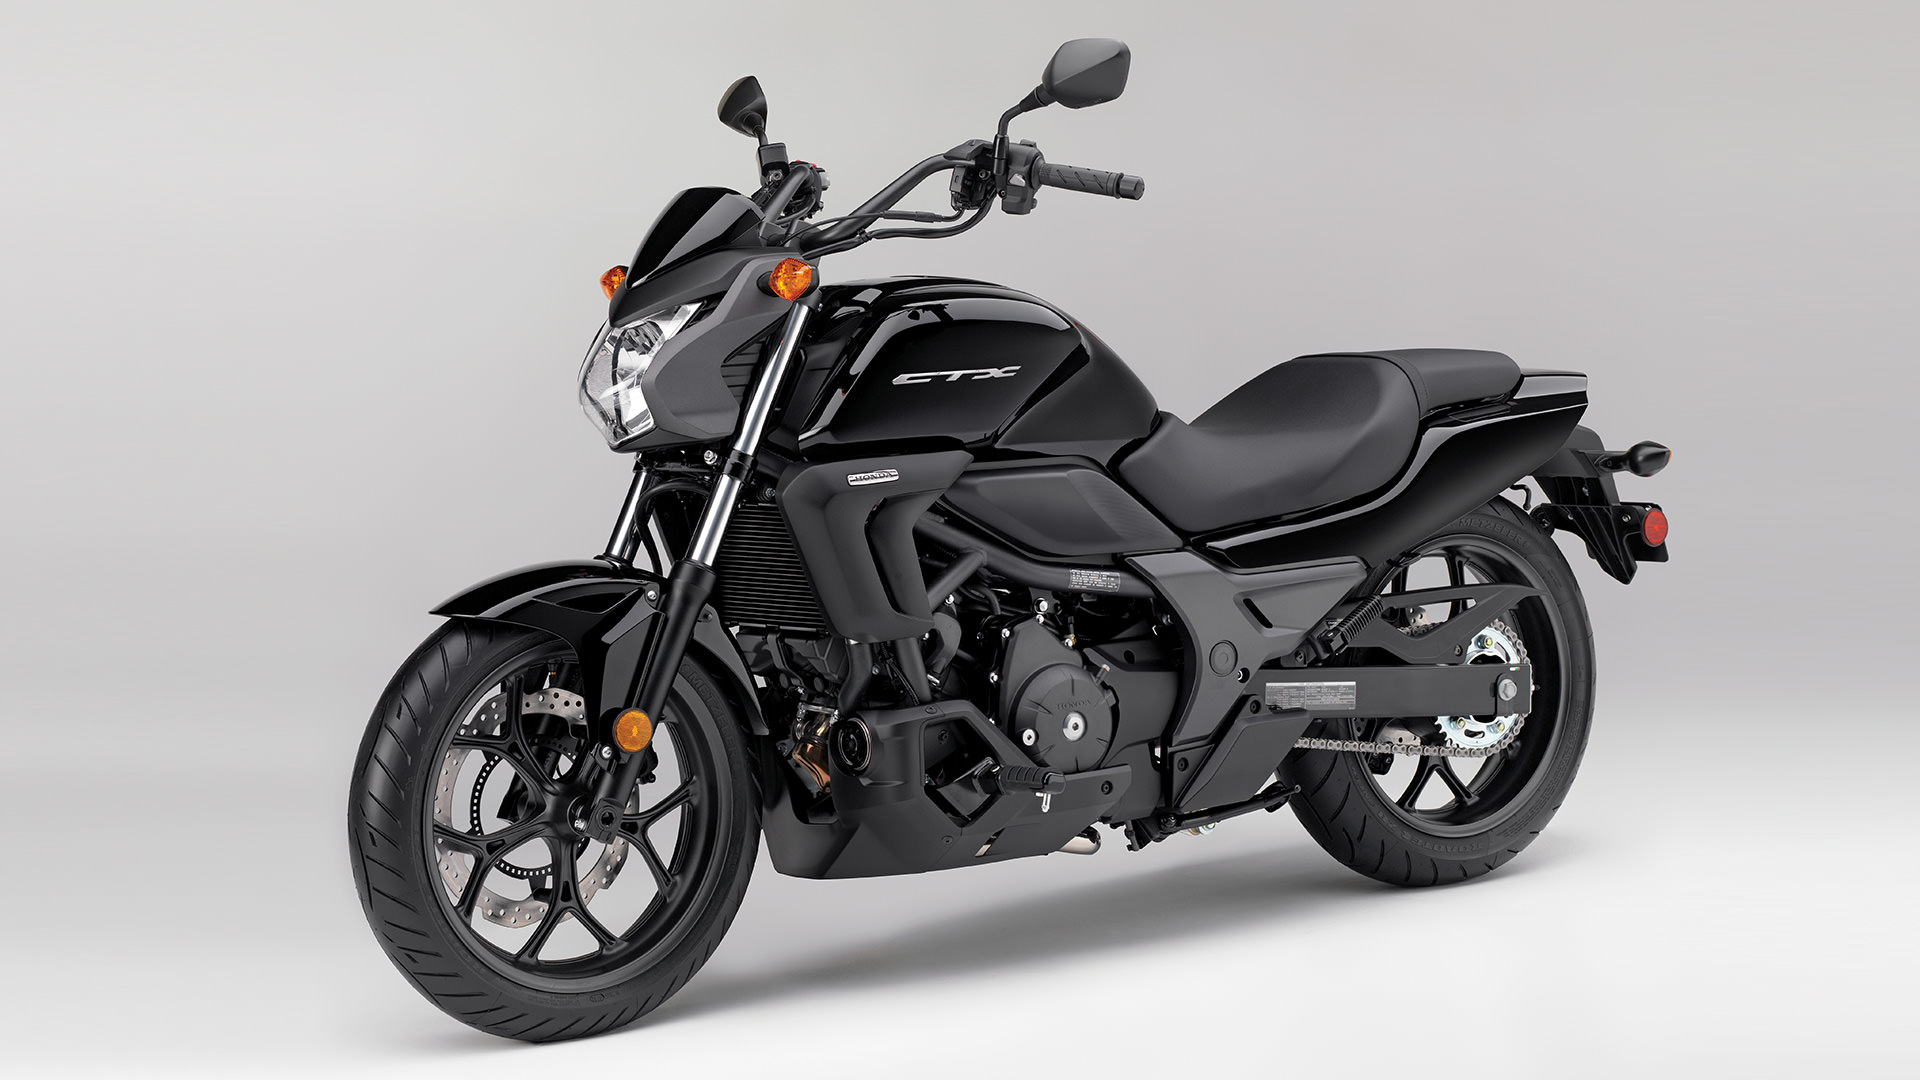 2018 Honda CTX700N DCT Review of Specs / Features